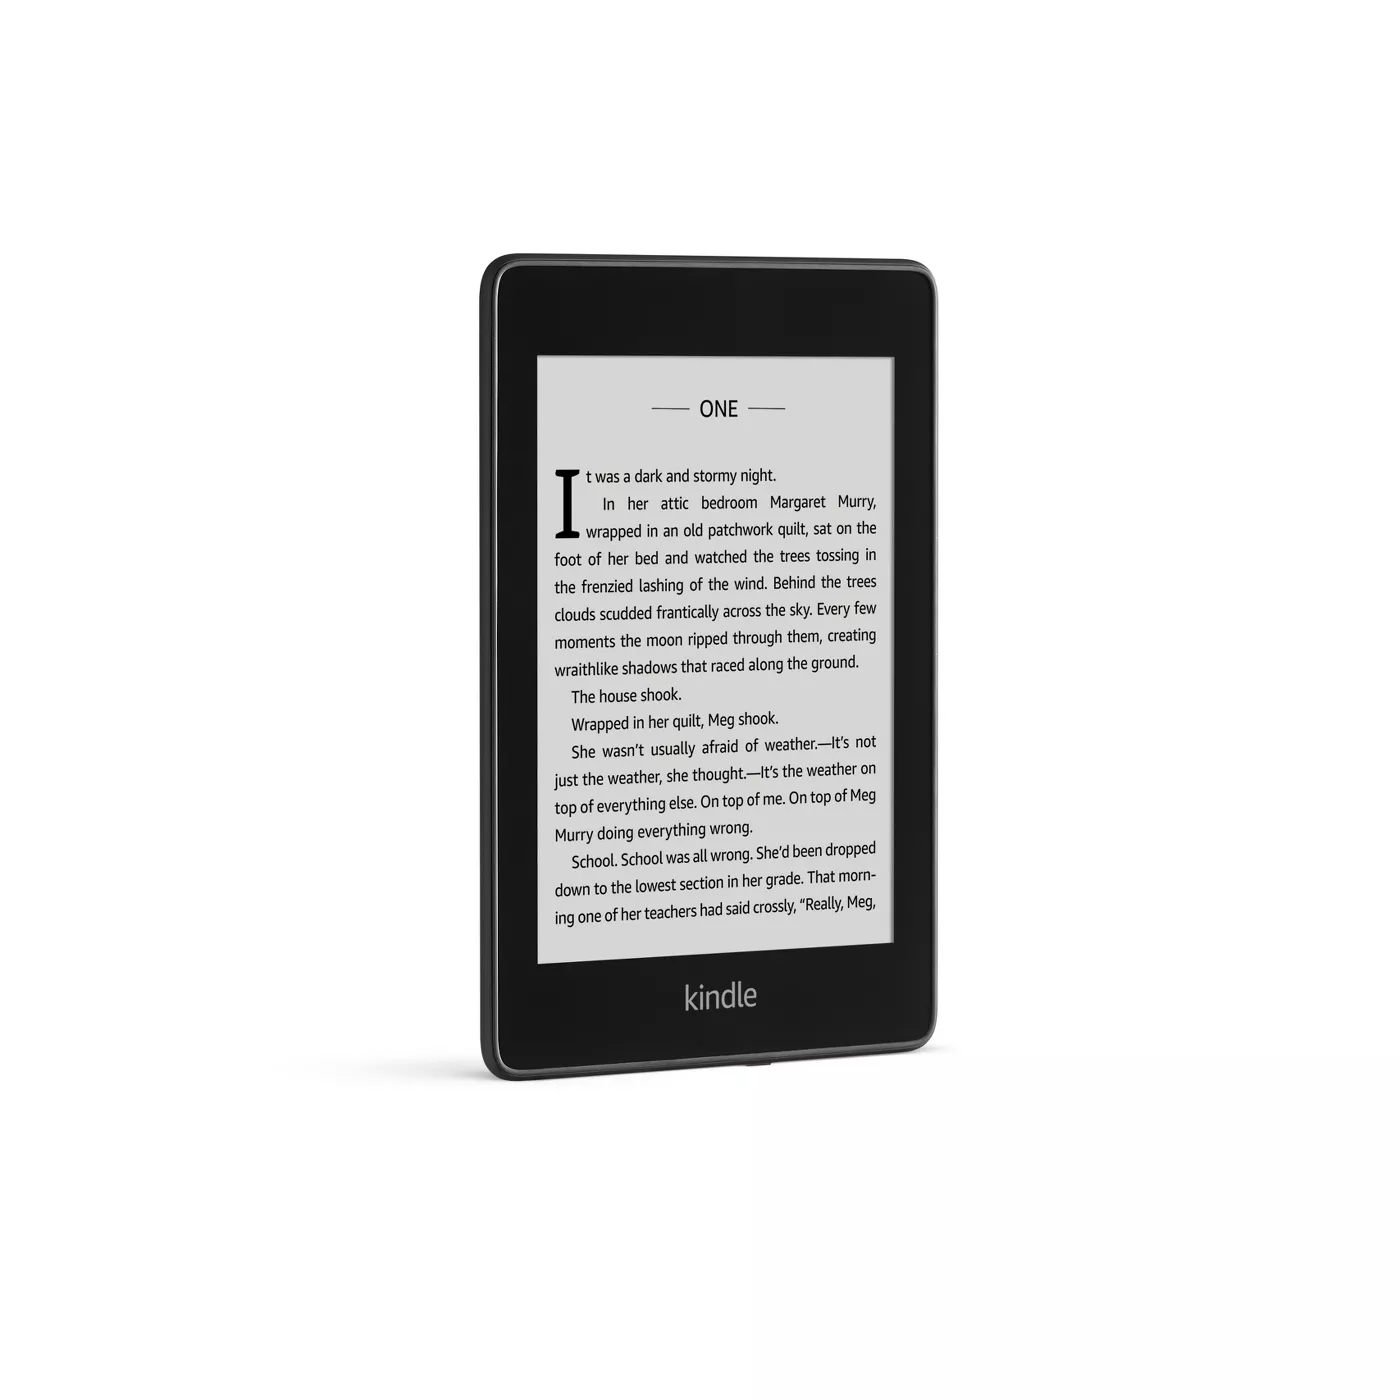 Amazon Kindle Paperwhite - Waterproof, Ad-Supported (10th Generation) - image 2 of 6